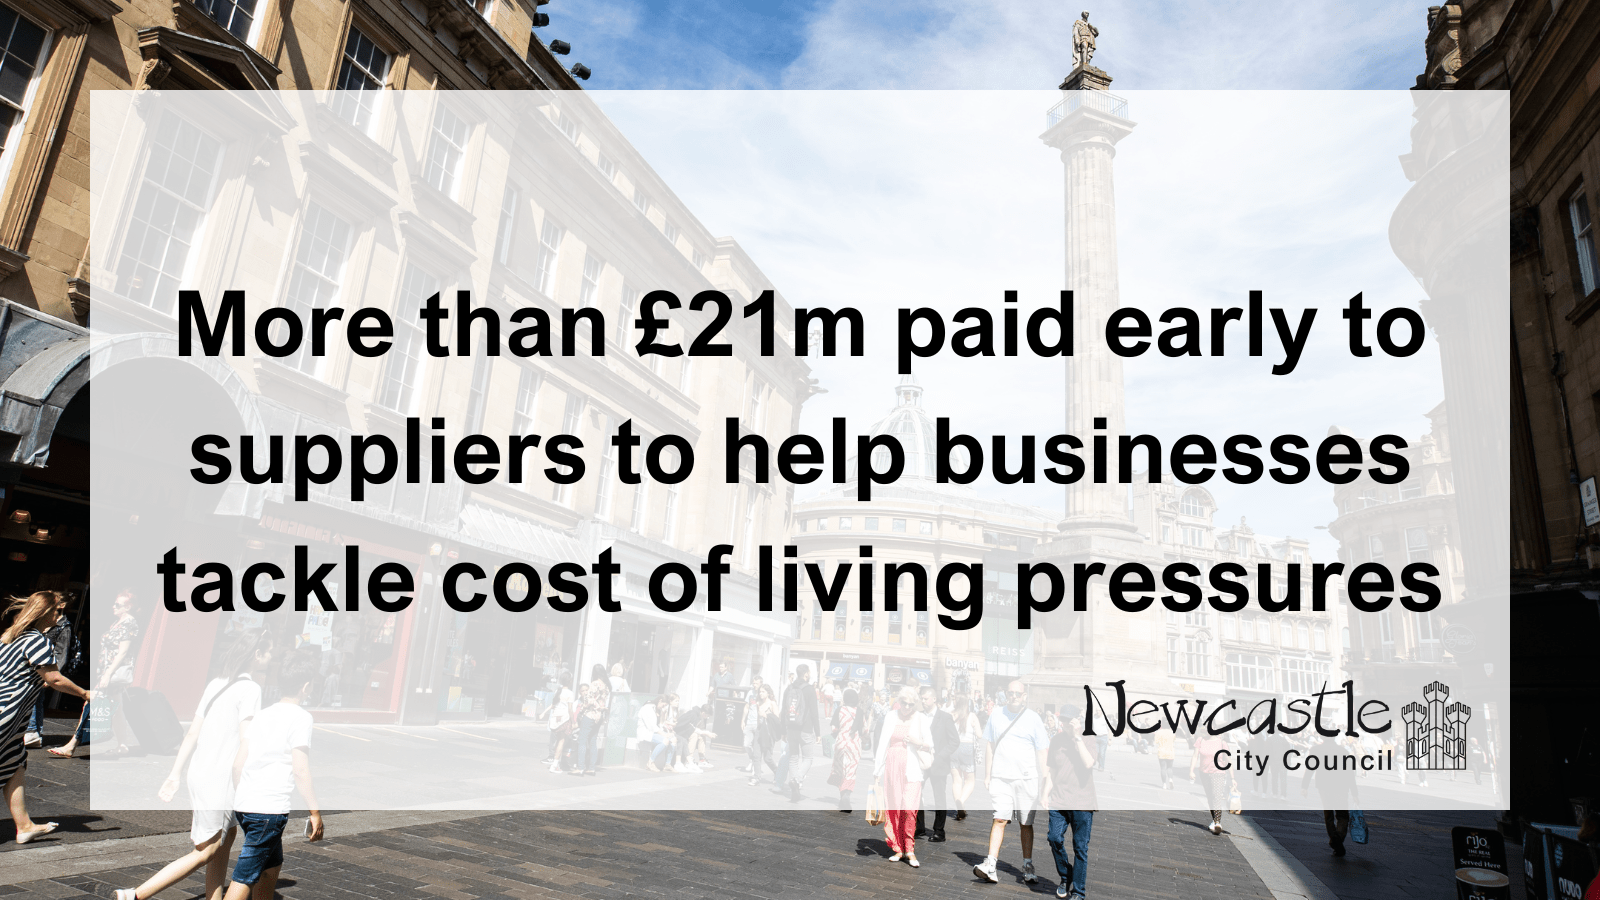 More than £21m paid early to suppliers to help businesses tackle cost of living pressures